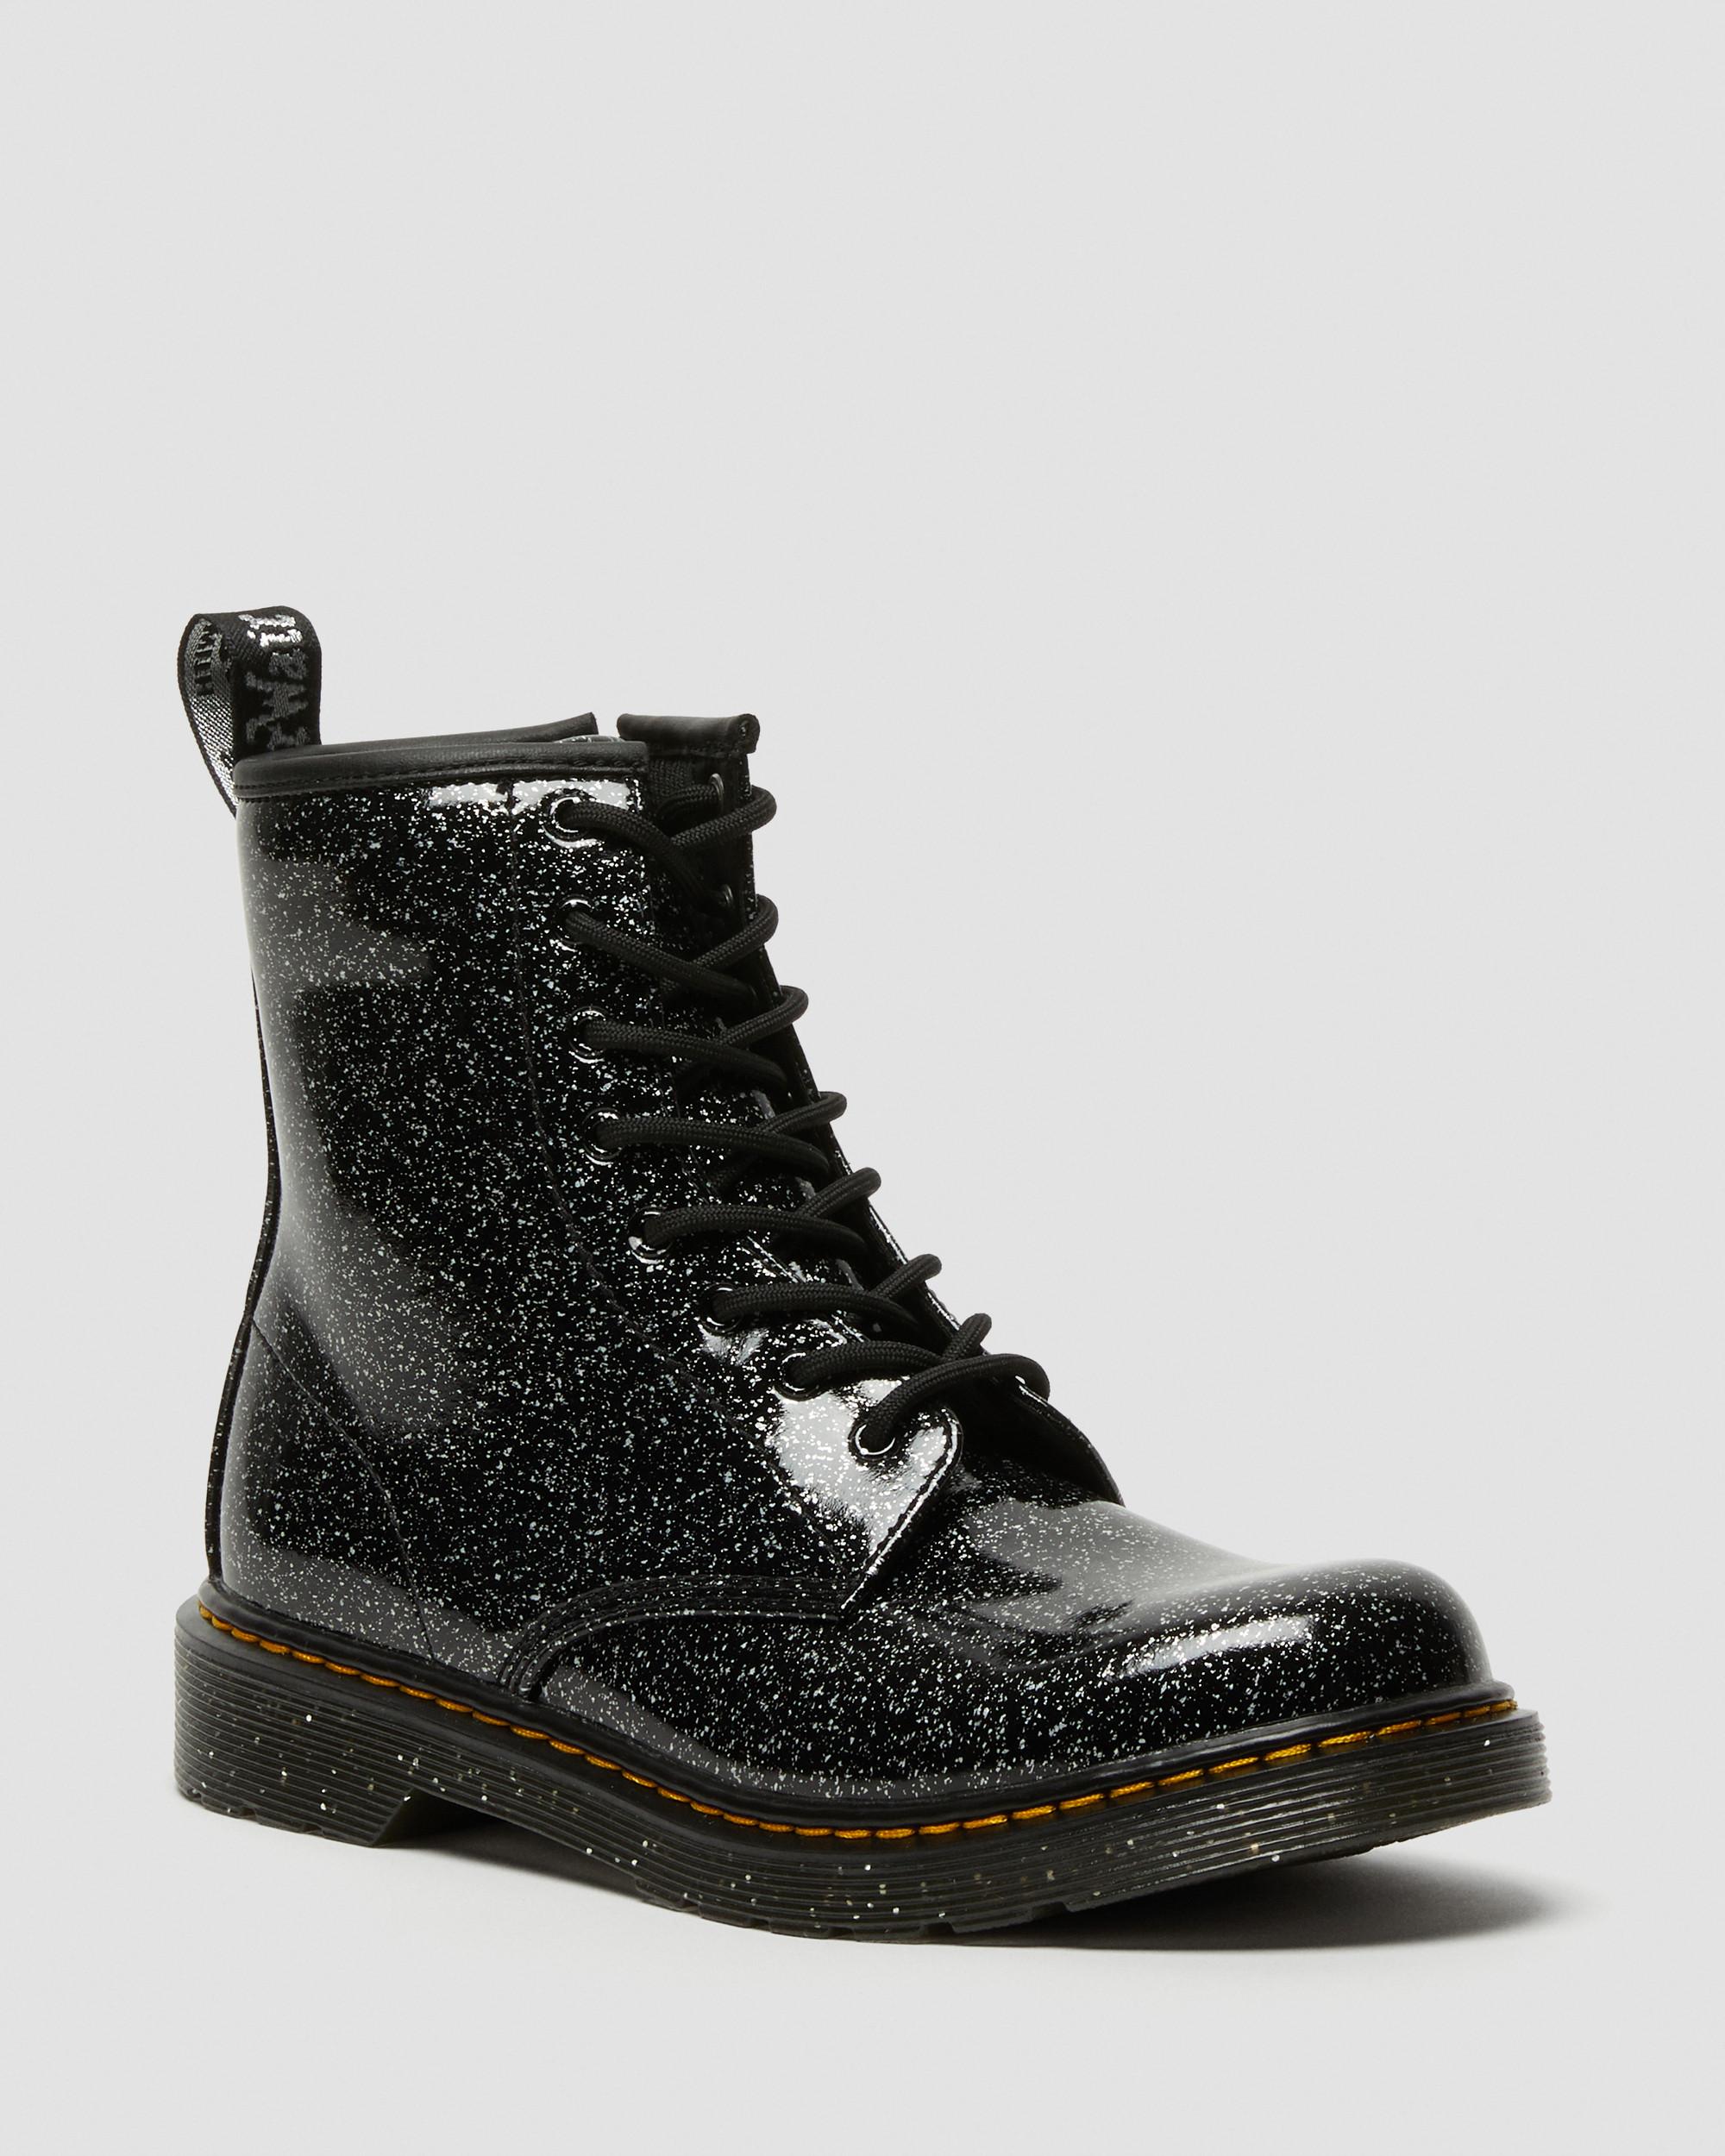 Youth 1460 Softy T Leather Lace Up Boots in Black | Dr. Martens